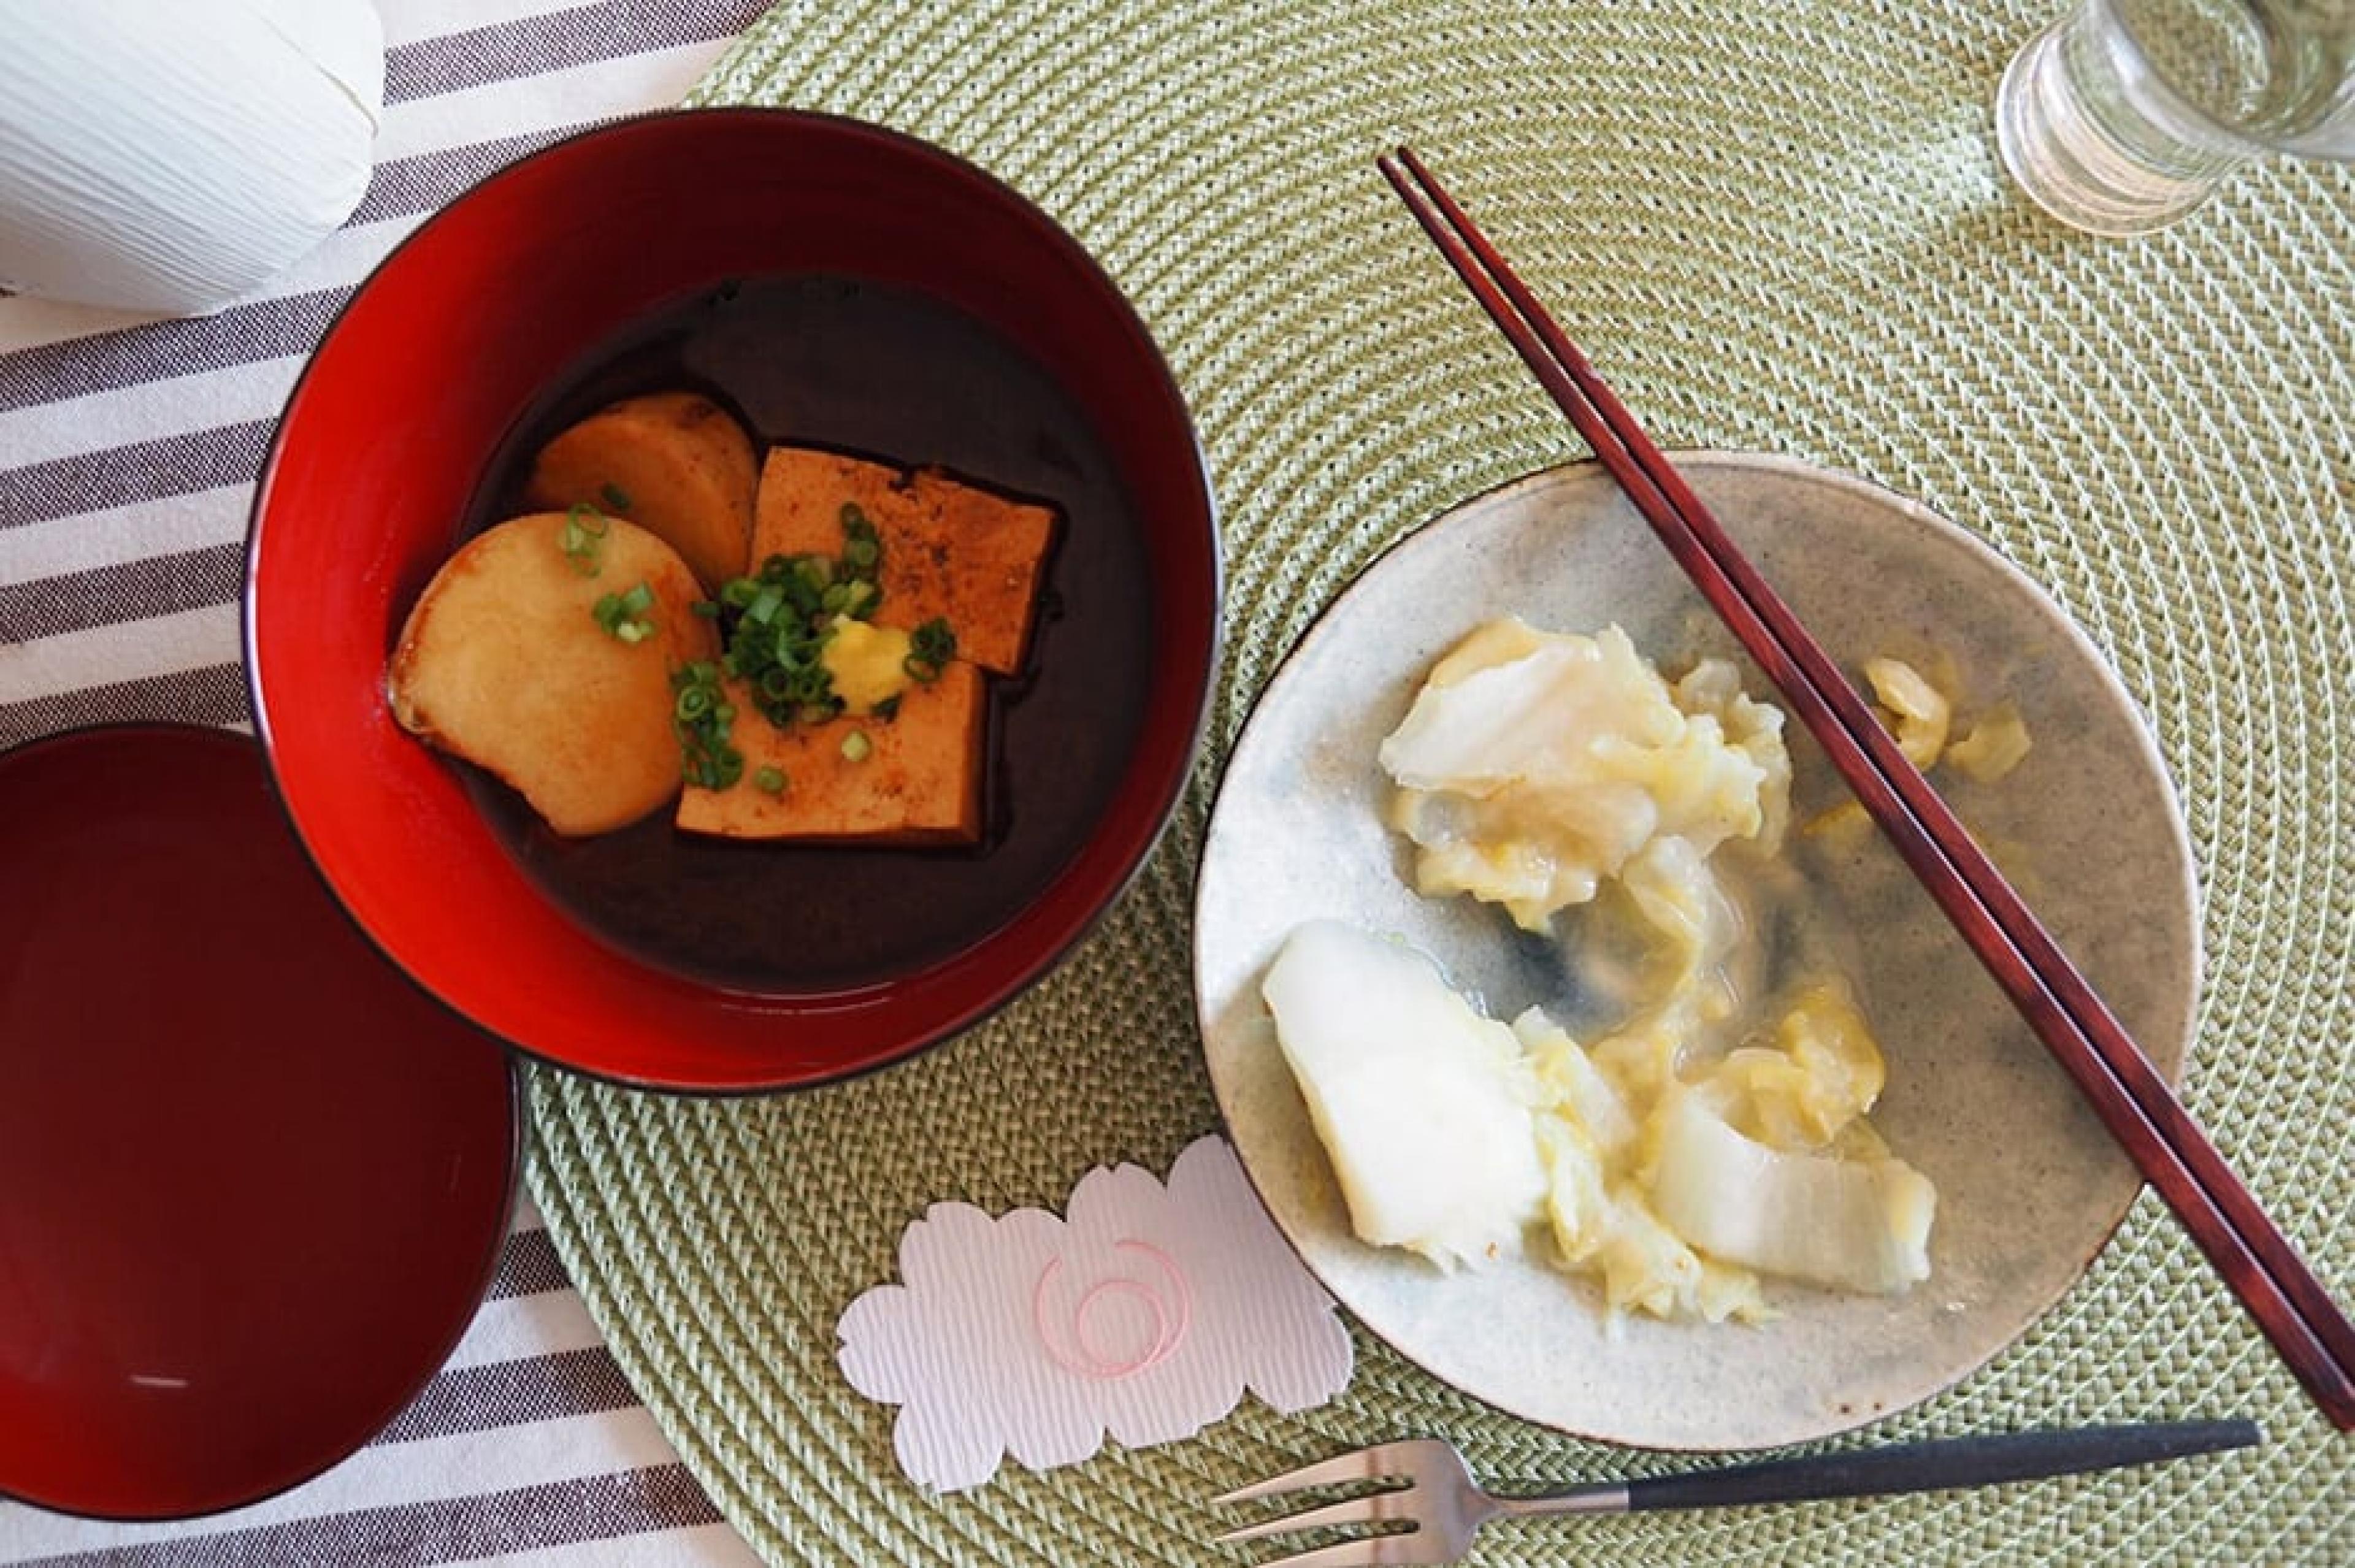 Food at Indagare Tours: In-Home Cooking Class, Tokyo, Japan